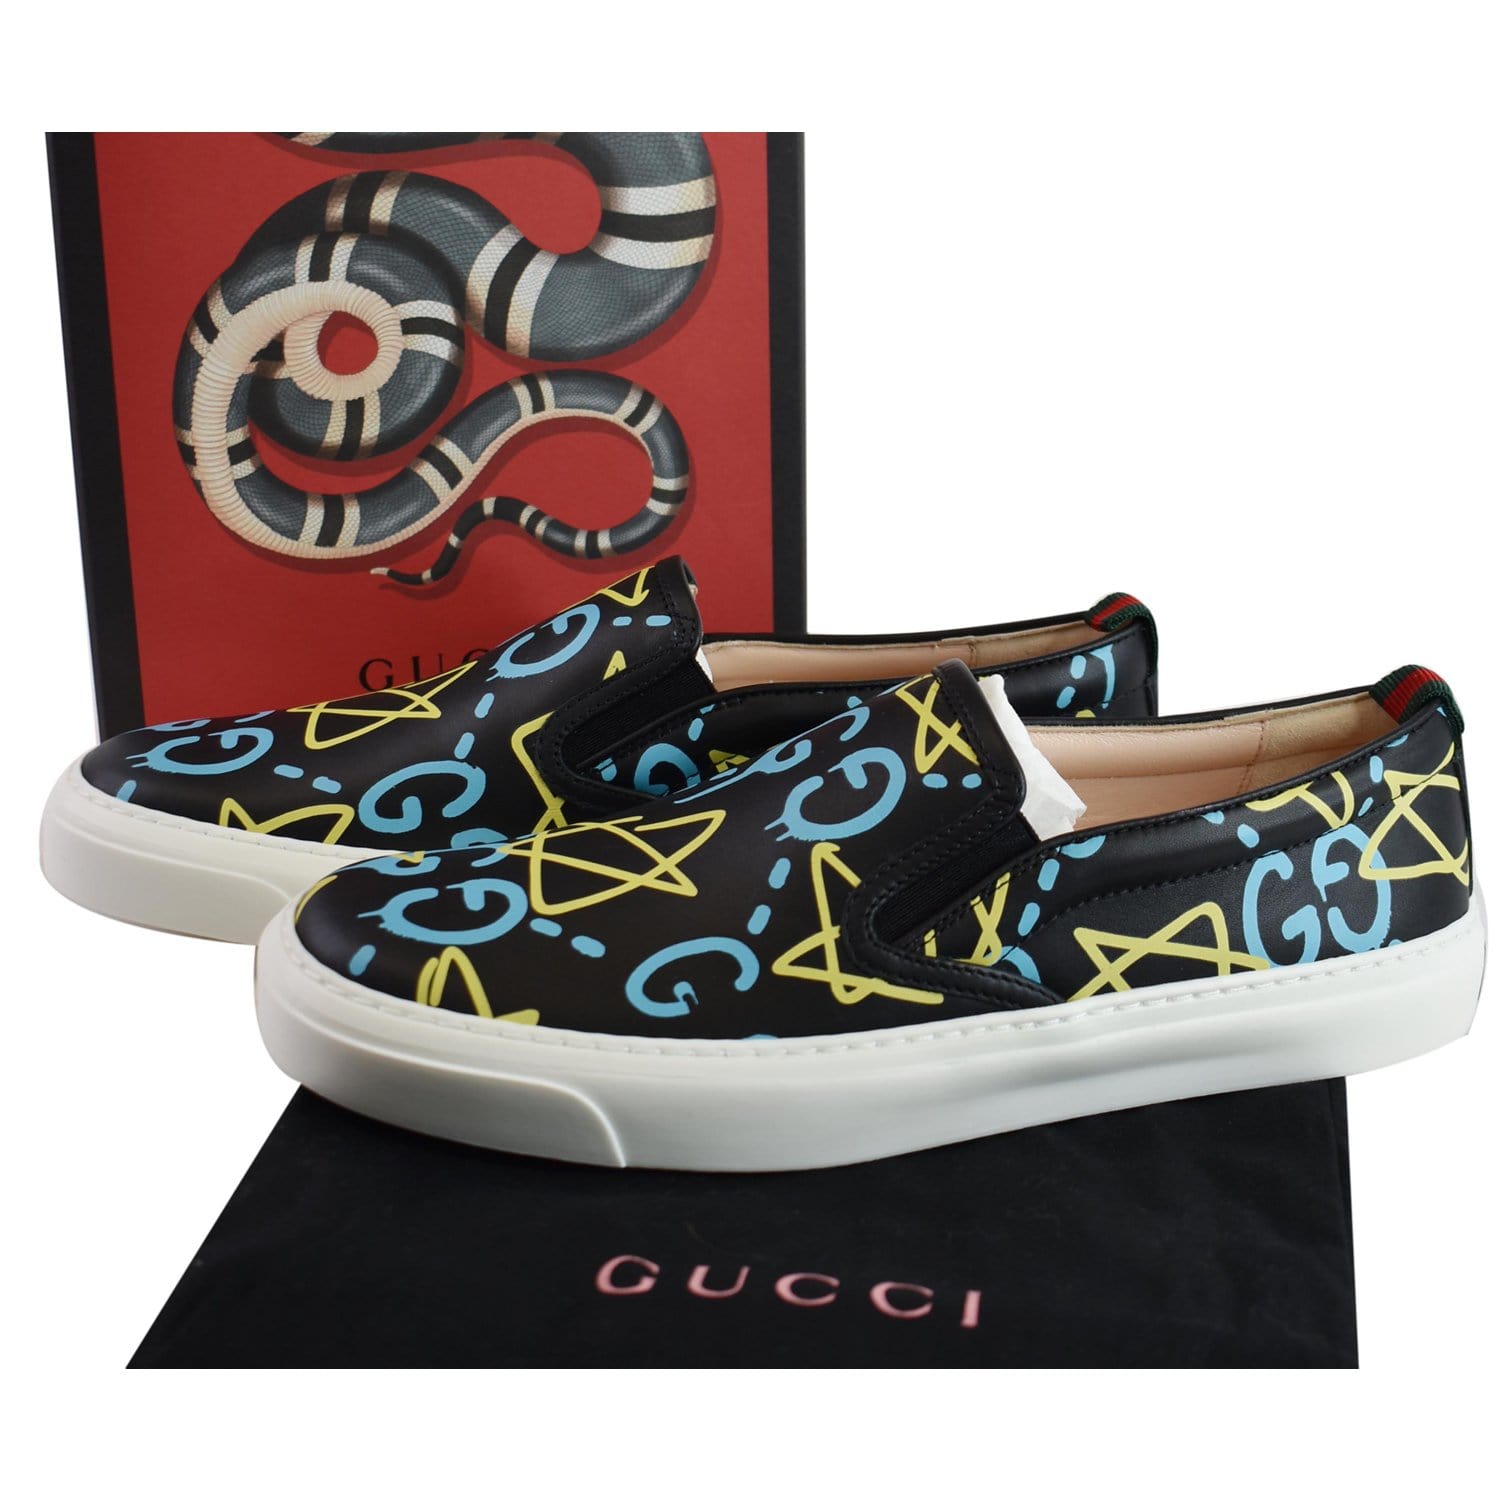 GUCCI Ghost Print Smooth Leather Slip-On Sneakers Black Size 9 - Last